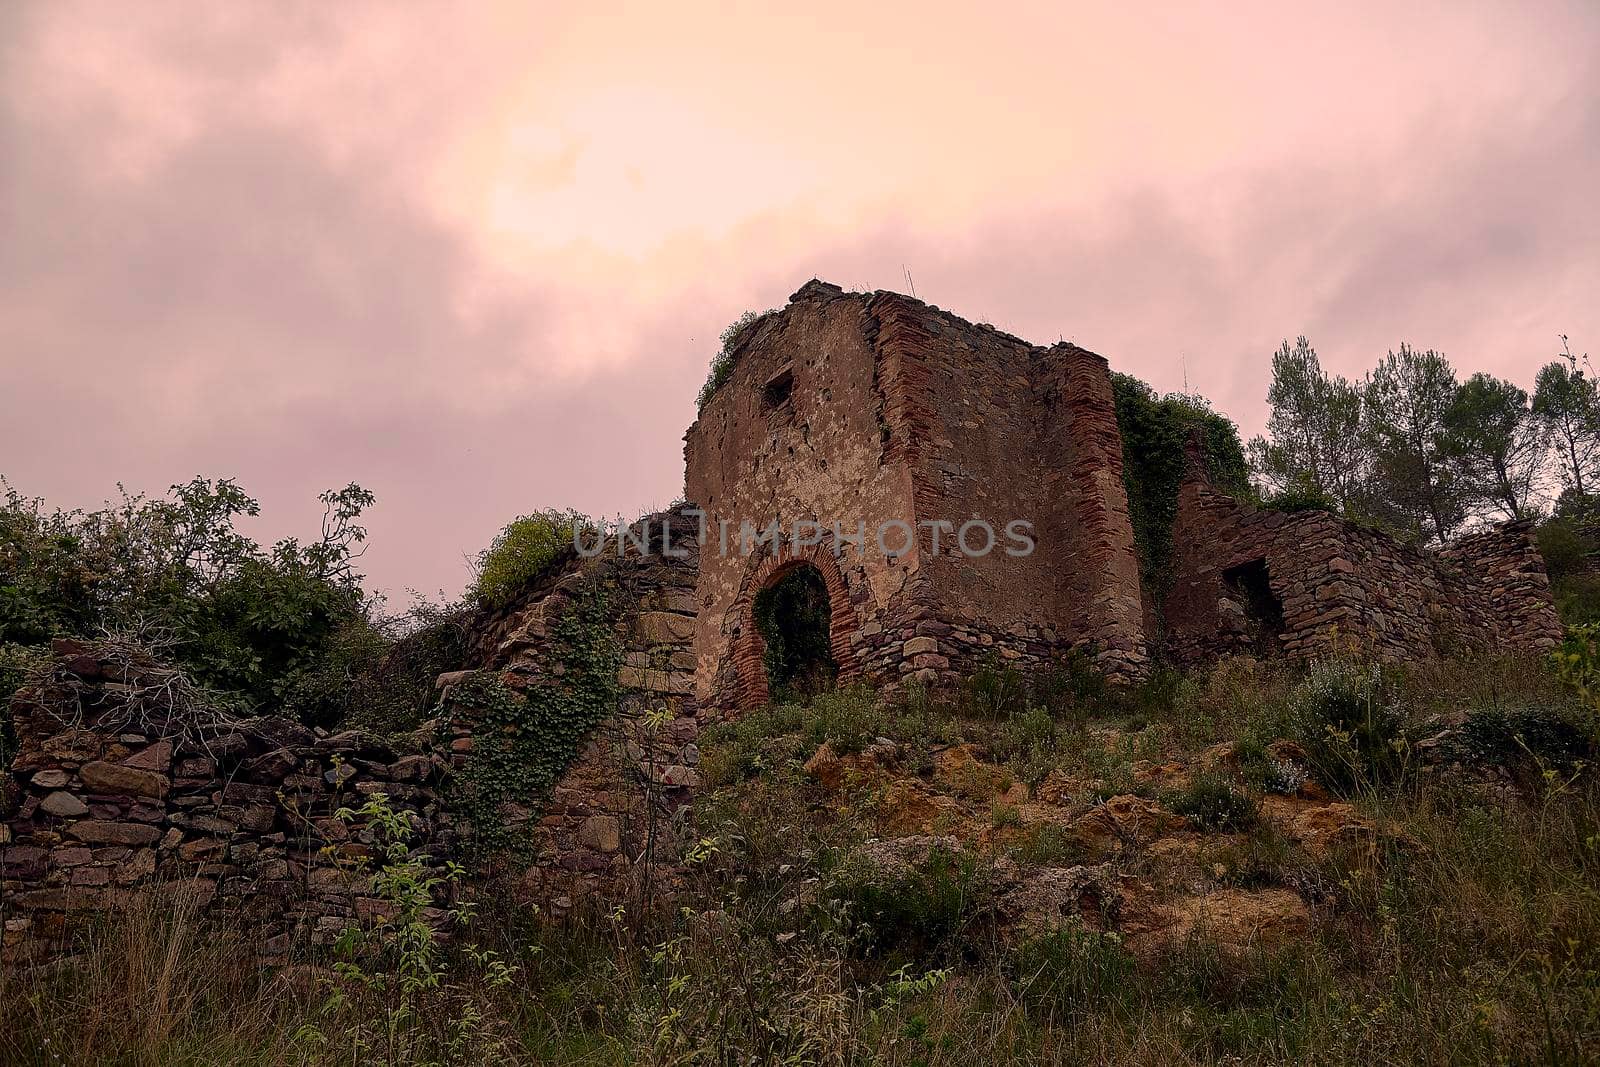 Jinquer, Castellon Spain. Adoned and destroyed church on a mountain by raul_ruiz